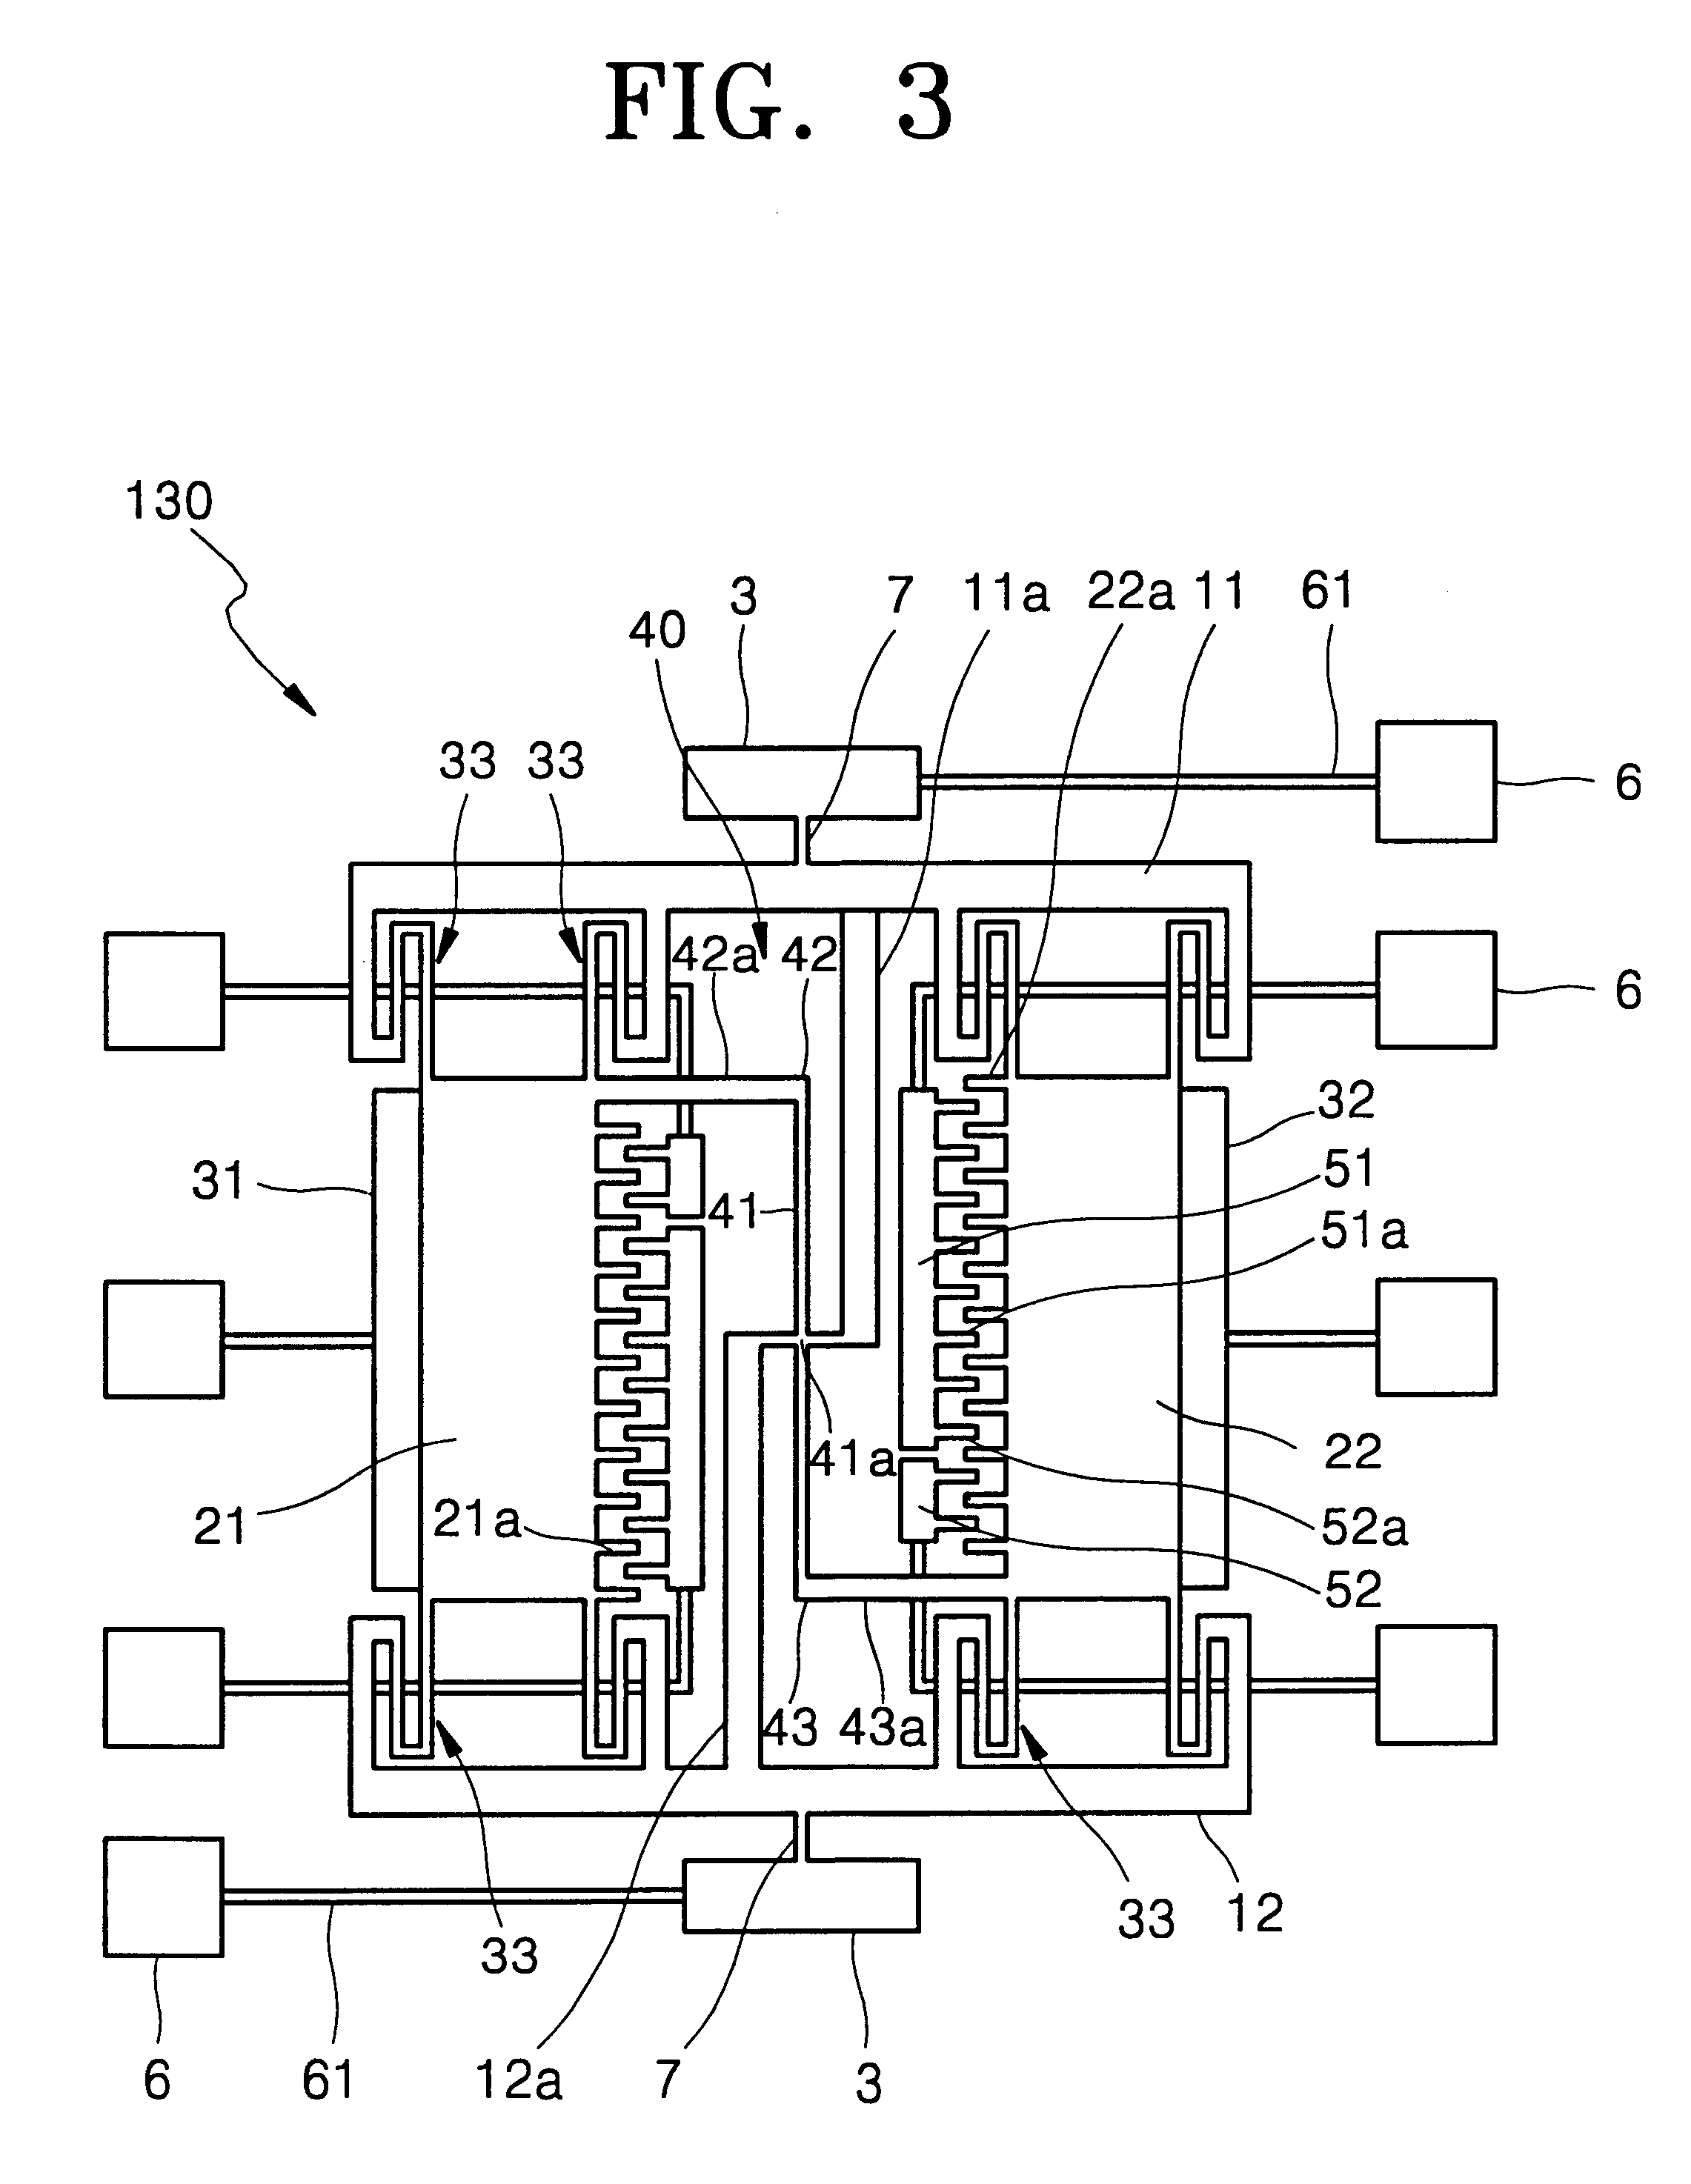 Method of fabricating micro electro mechanical system structure which can be vacuum-packed at wafer level